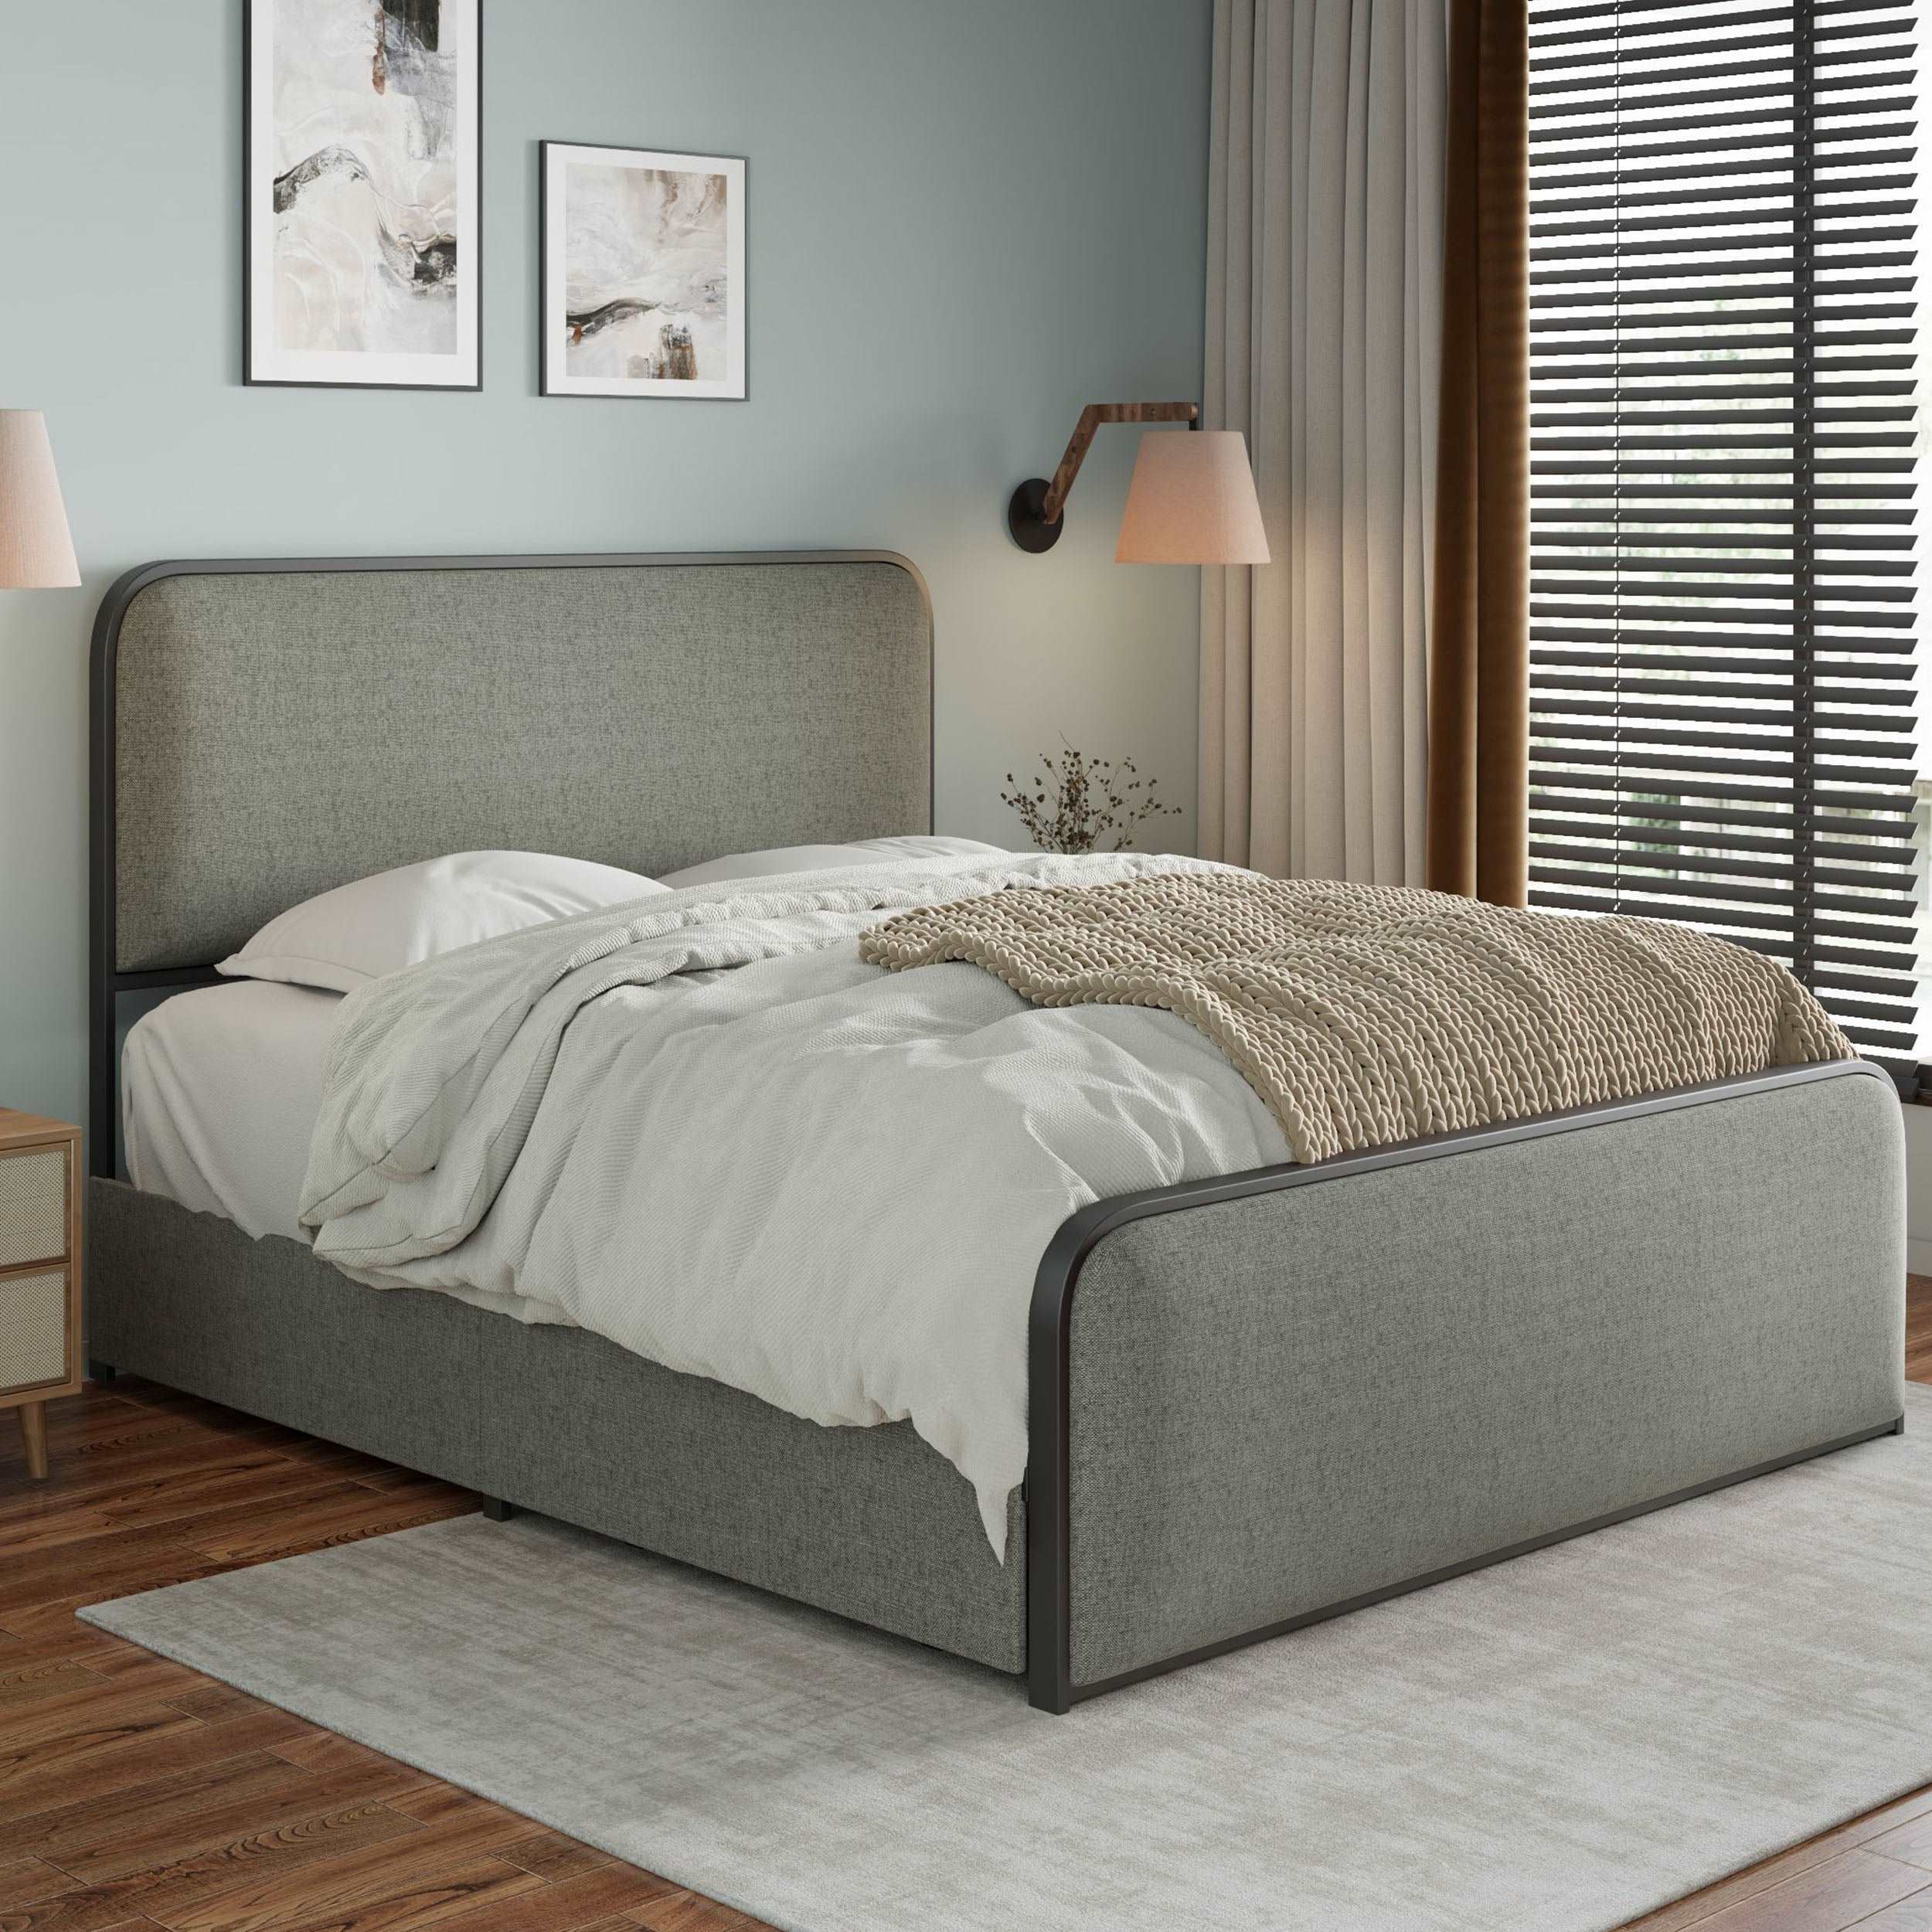 Bellemave Modern Metal Bed Frame with Curved Upholstered Headboard and Footboard Bed with 4 Storage Drawers, Heavy Duty Metal Slats